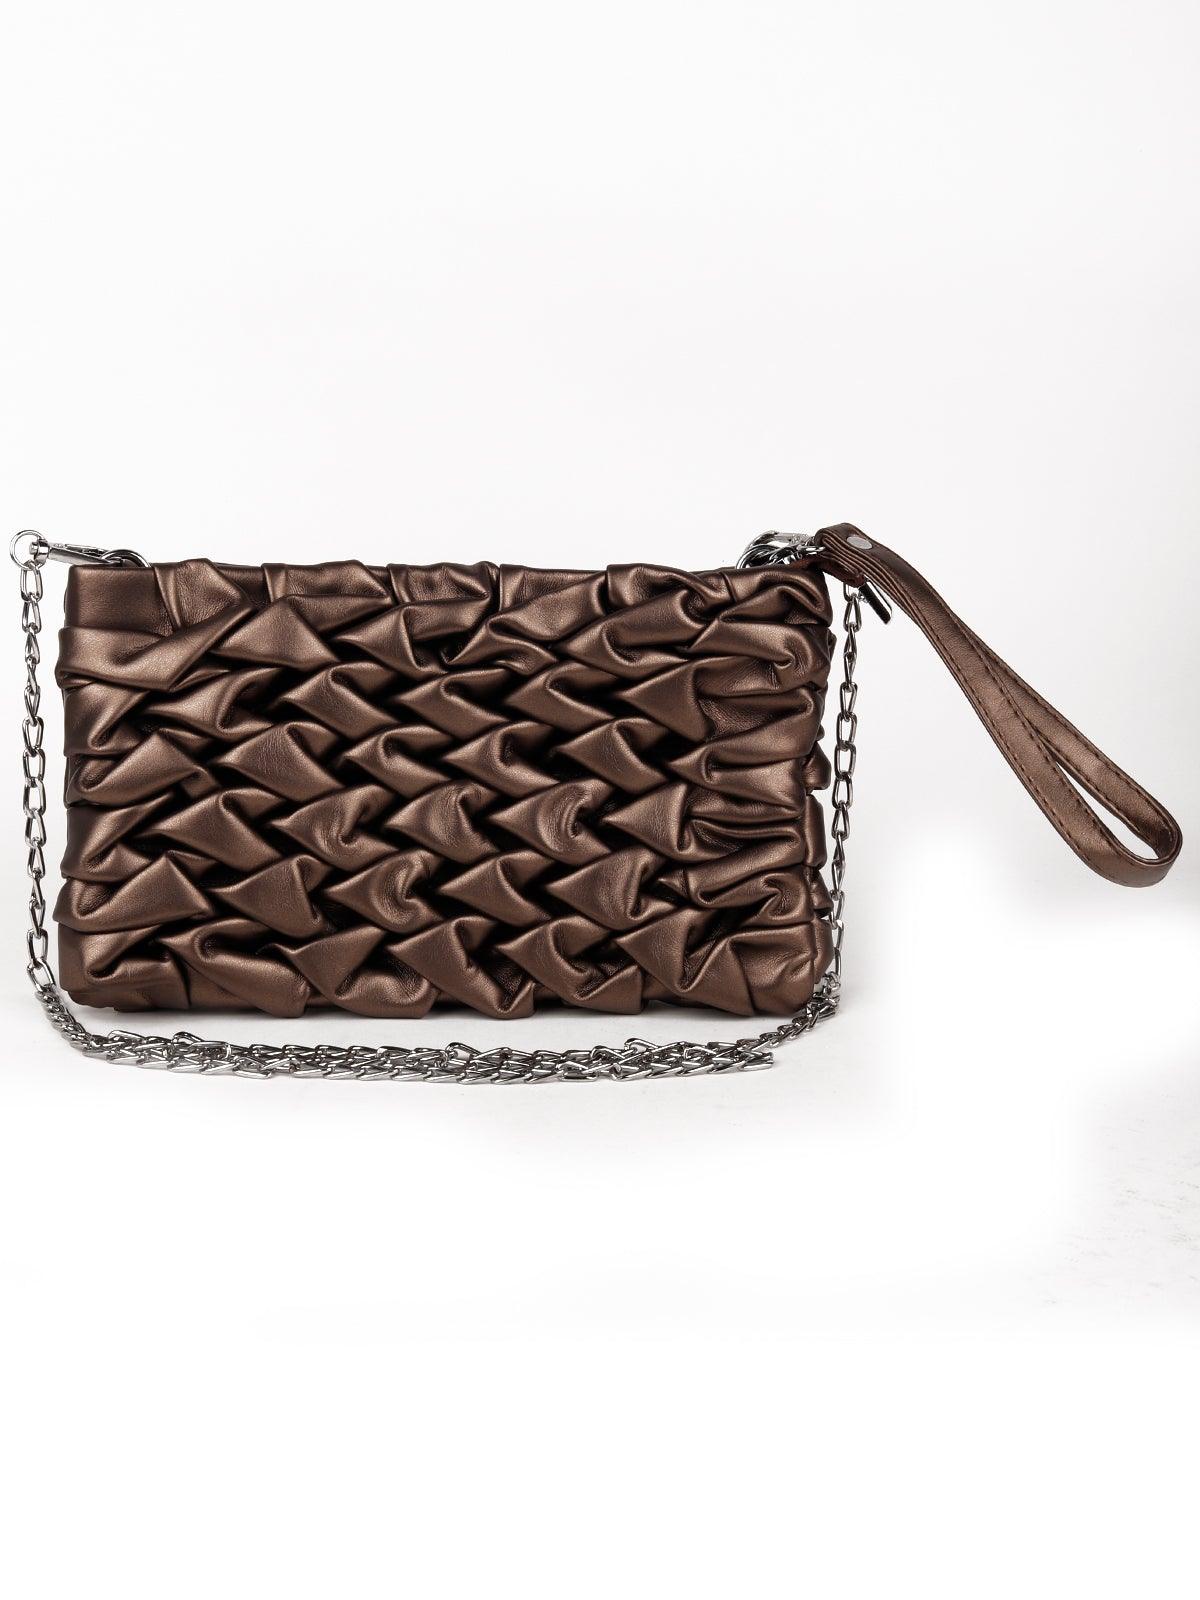 Exquisite chocolate metallic ruched bag - Odette